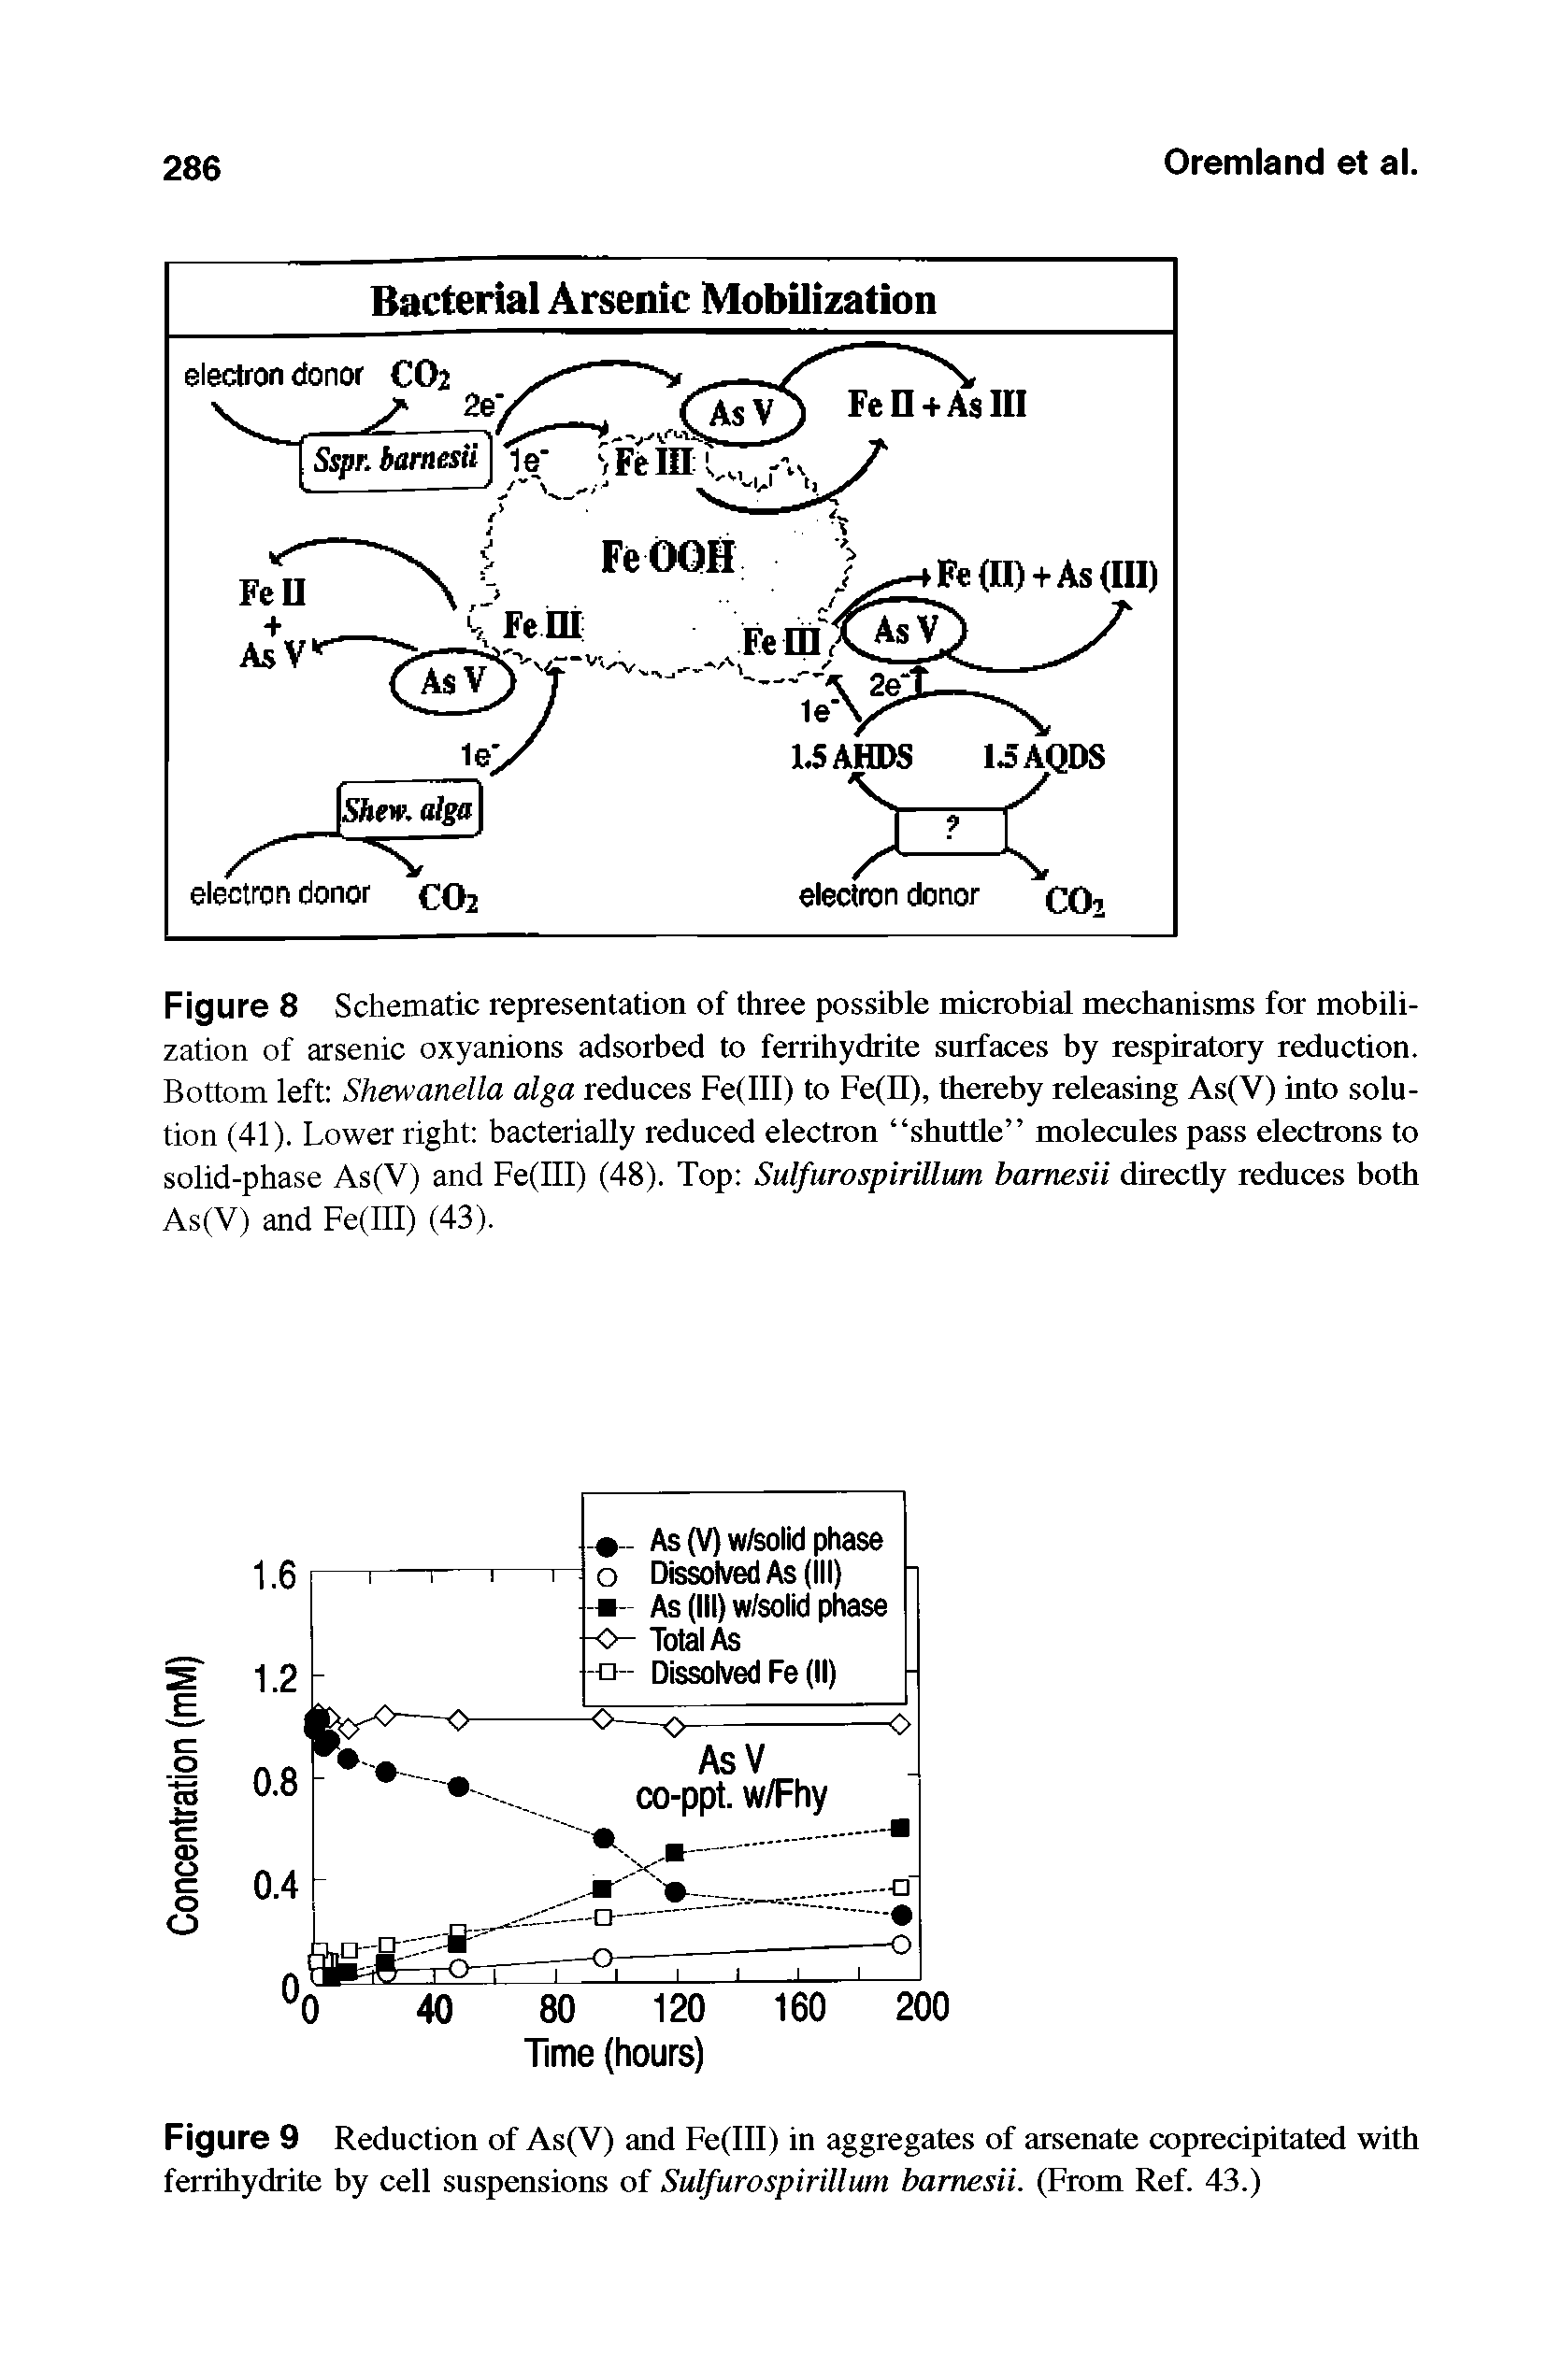 Figure 8 Schematic representation of three possible microbial mechanisms for mobilization of arsenic oxyanions adsorbed to ferrihydrite surfaces by respiratory reduction. Bottom left Shewanella alga reduces Fe(lll) to Fe(It), thereby releasing As(V) into solution (41). Lower right bacterially reduced electron shuttle molecules pass electrons to solid-phase As(V) and Fe(III) (48). Top Sulfiirospirillum bamesii directly reduces both As(V) and Fe(III) (43).